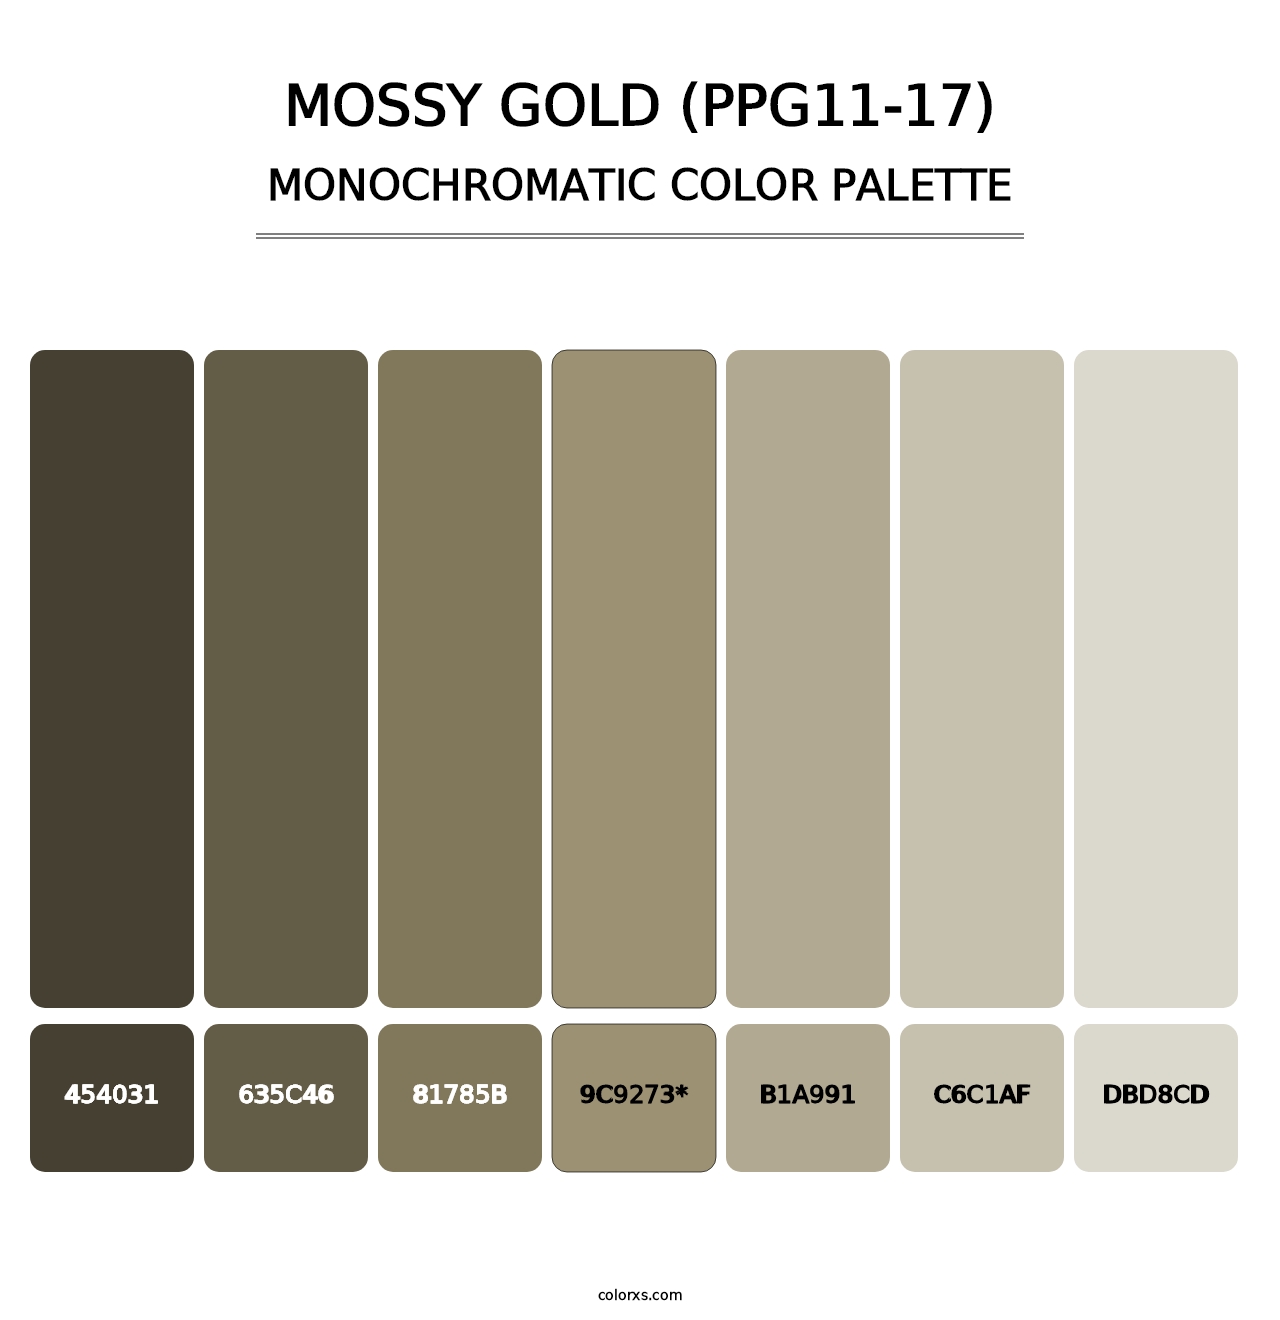 Mossy Gold (PPG11-17) - Monochromatic Color Palette